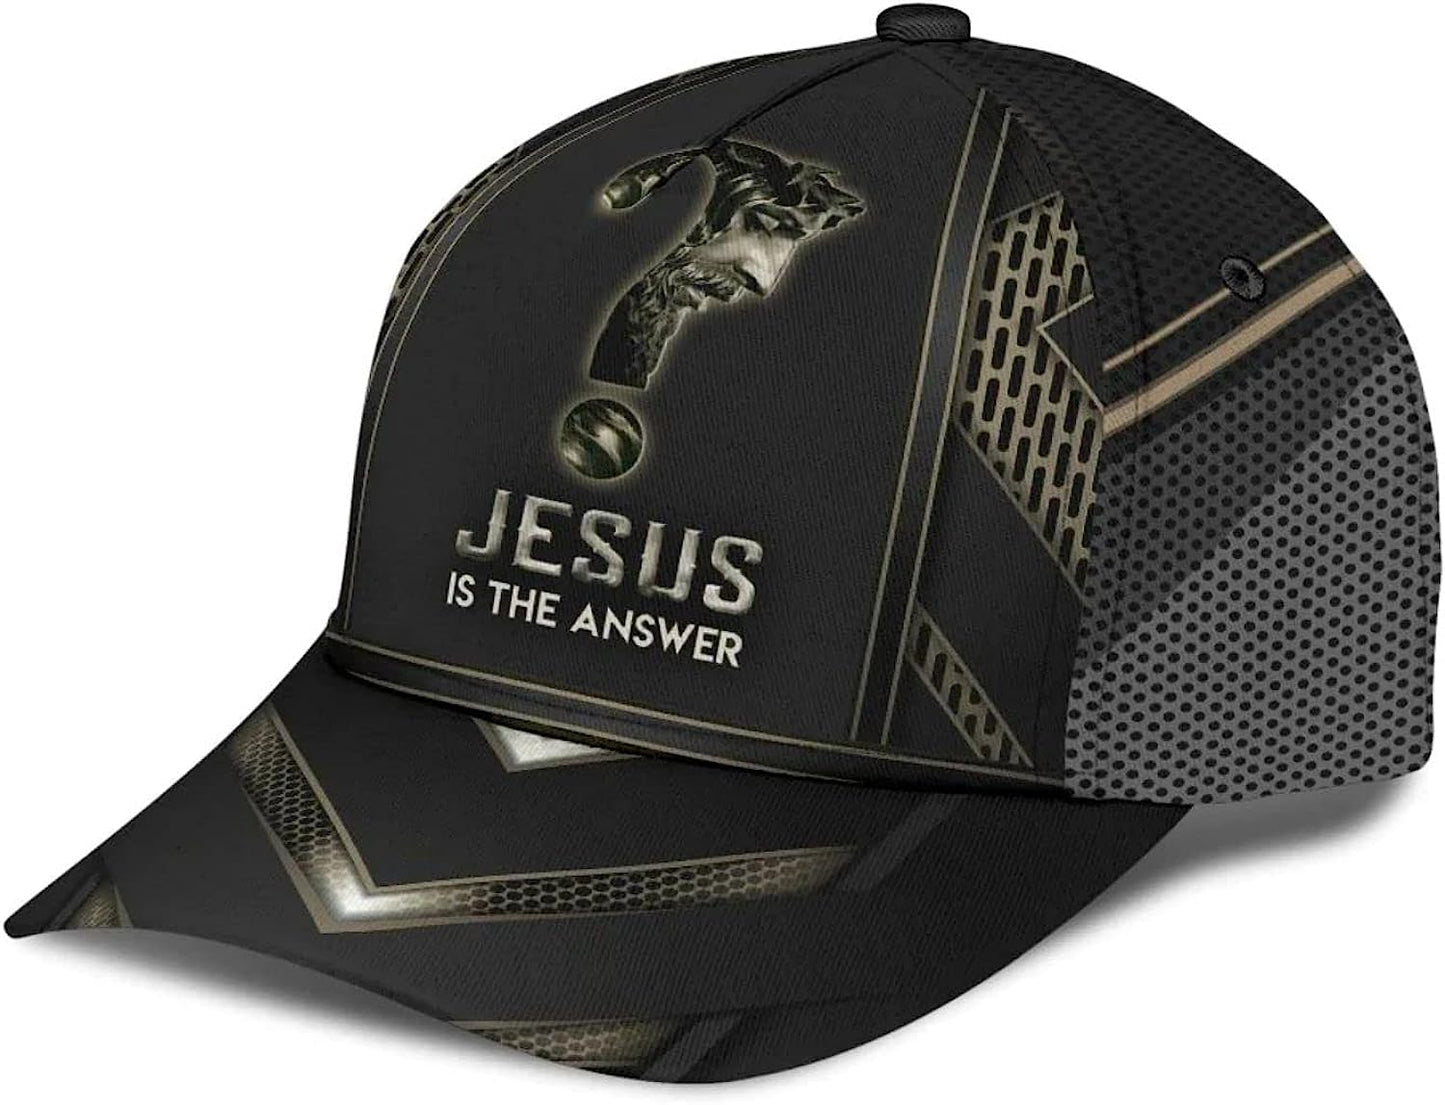 Jesus Is The Answer Baseball Cap - Christian Hats for Men and Women